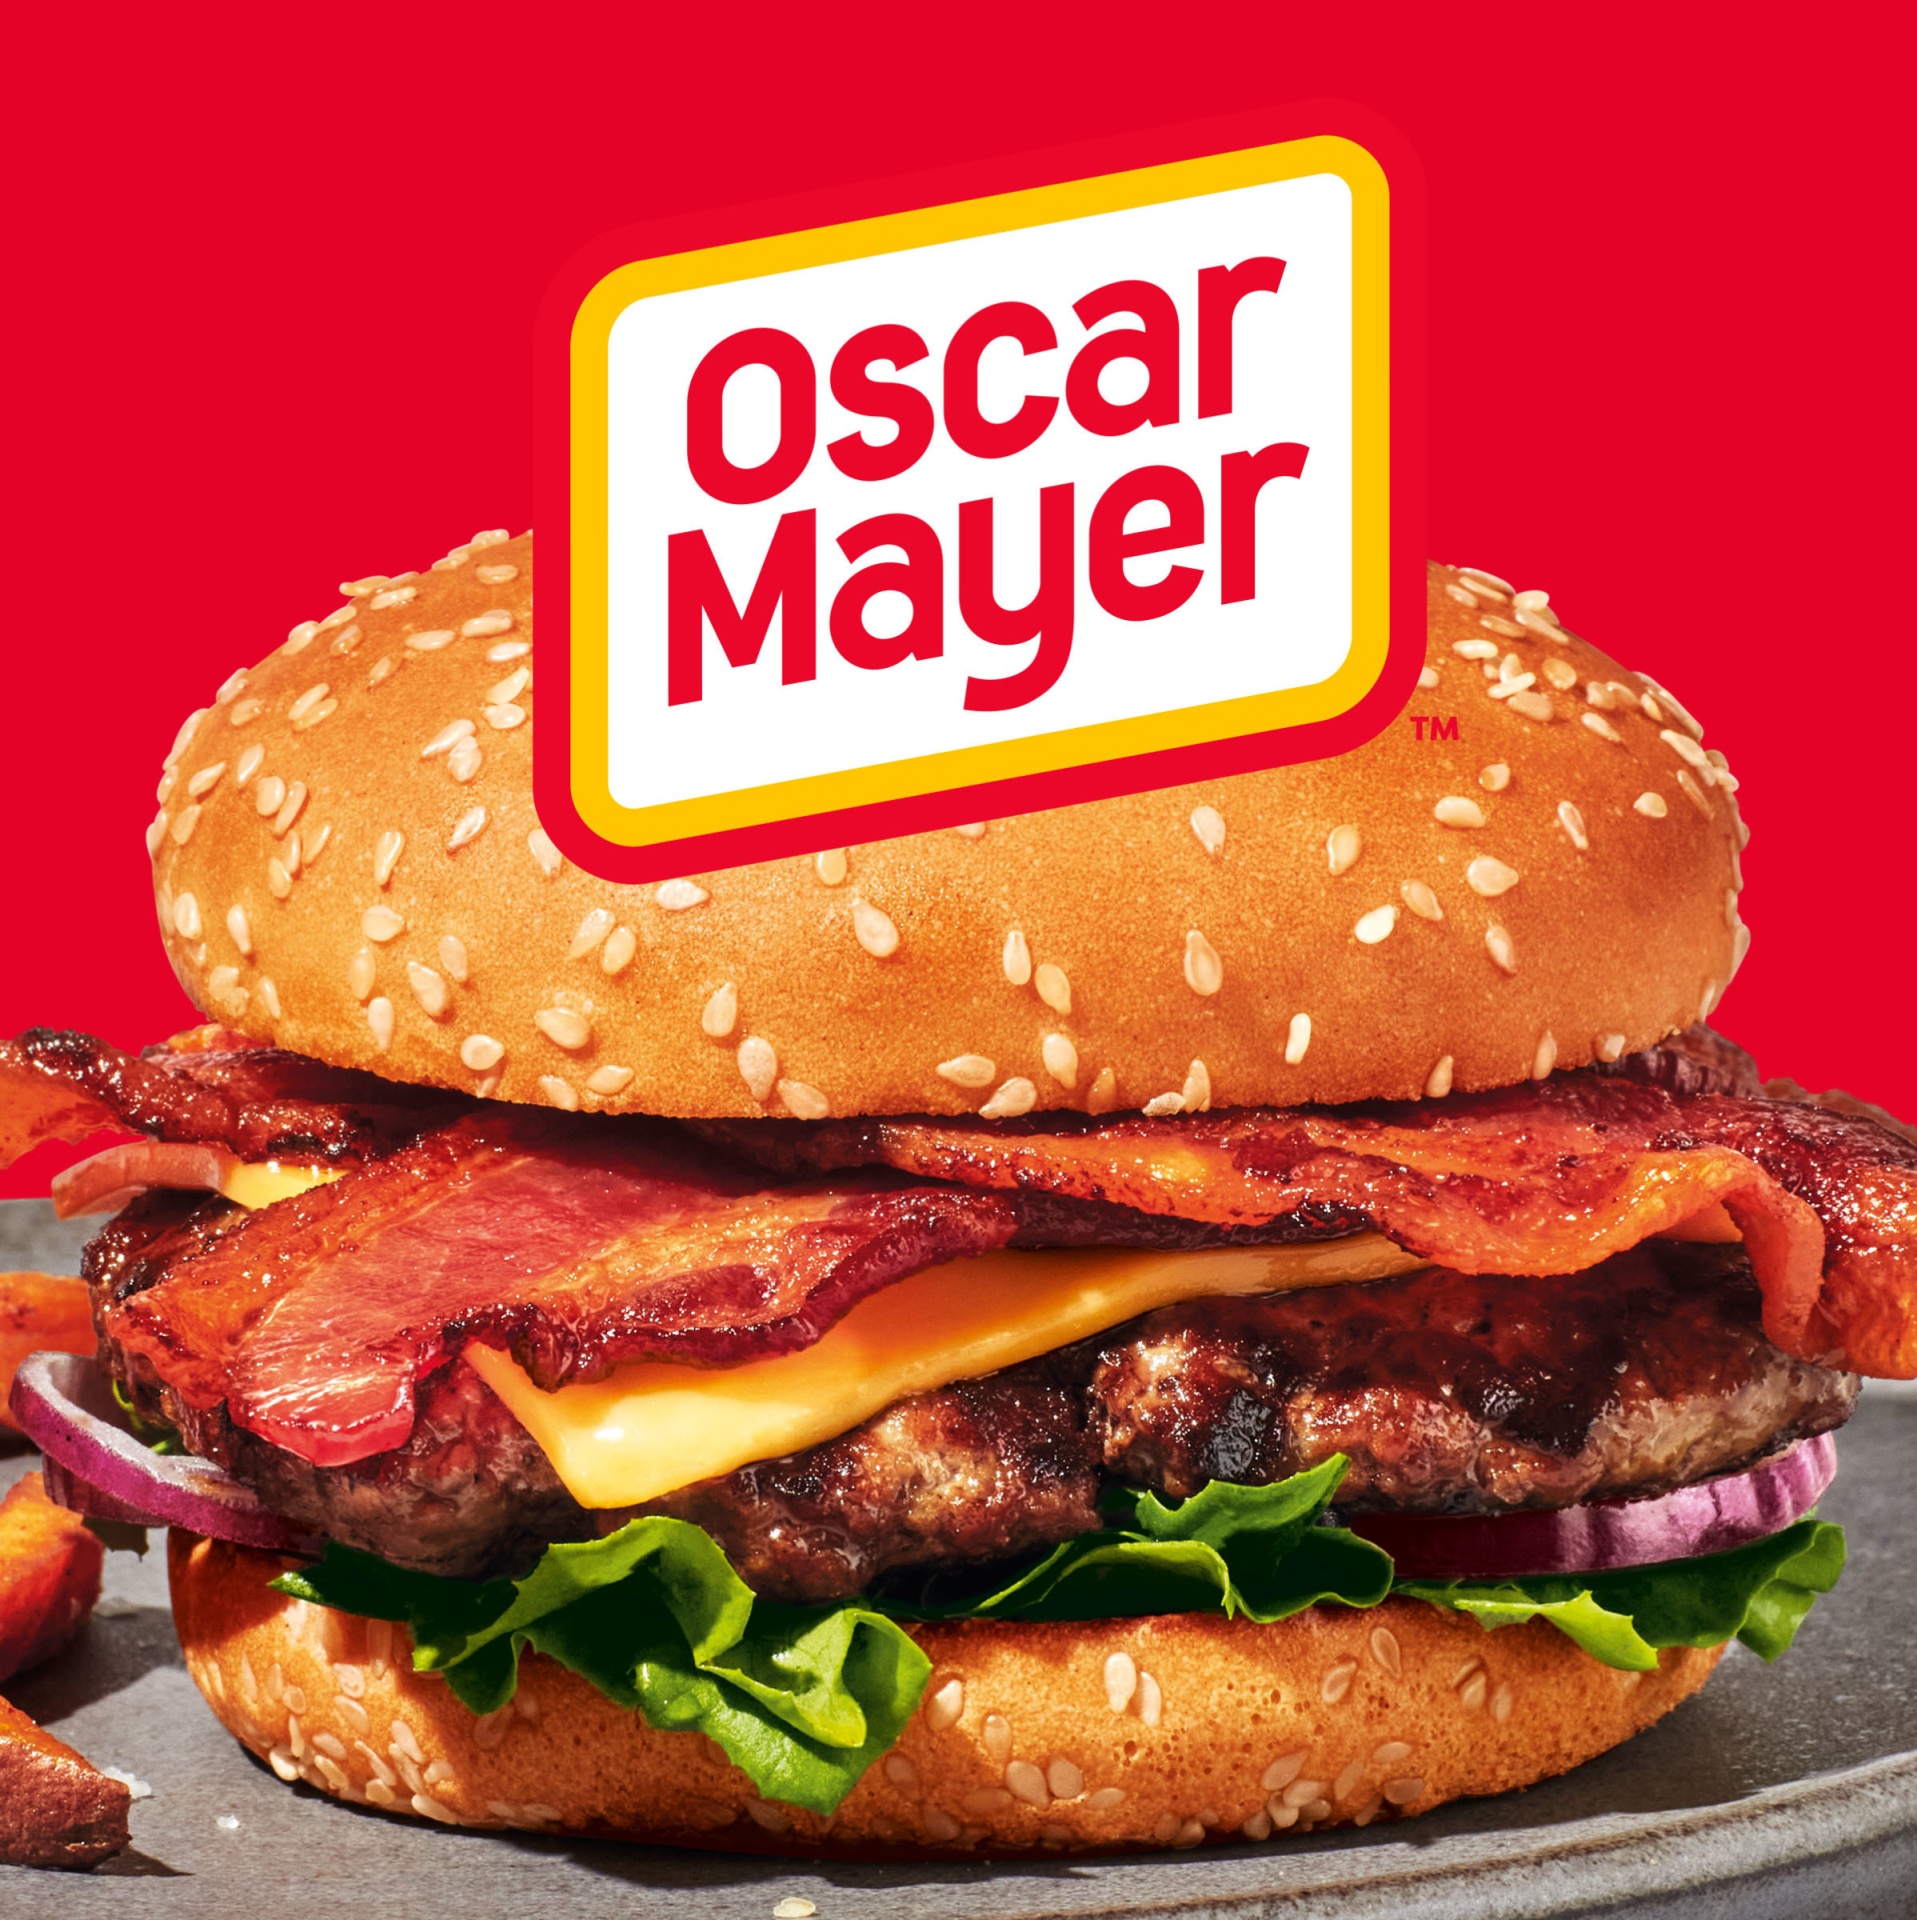 slide 4 of 7, Oscar Mayer Naturally Hardwood Smoked Thick Cut Bacon Pack, 11-13 slices, 16 oz